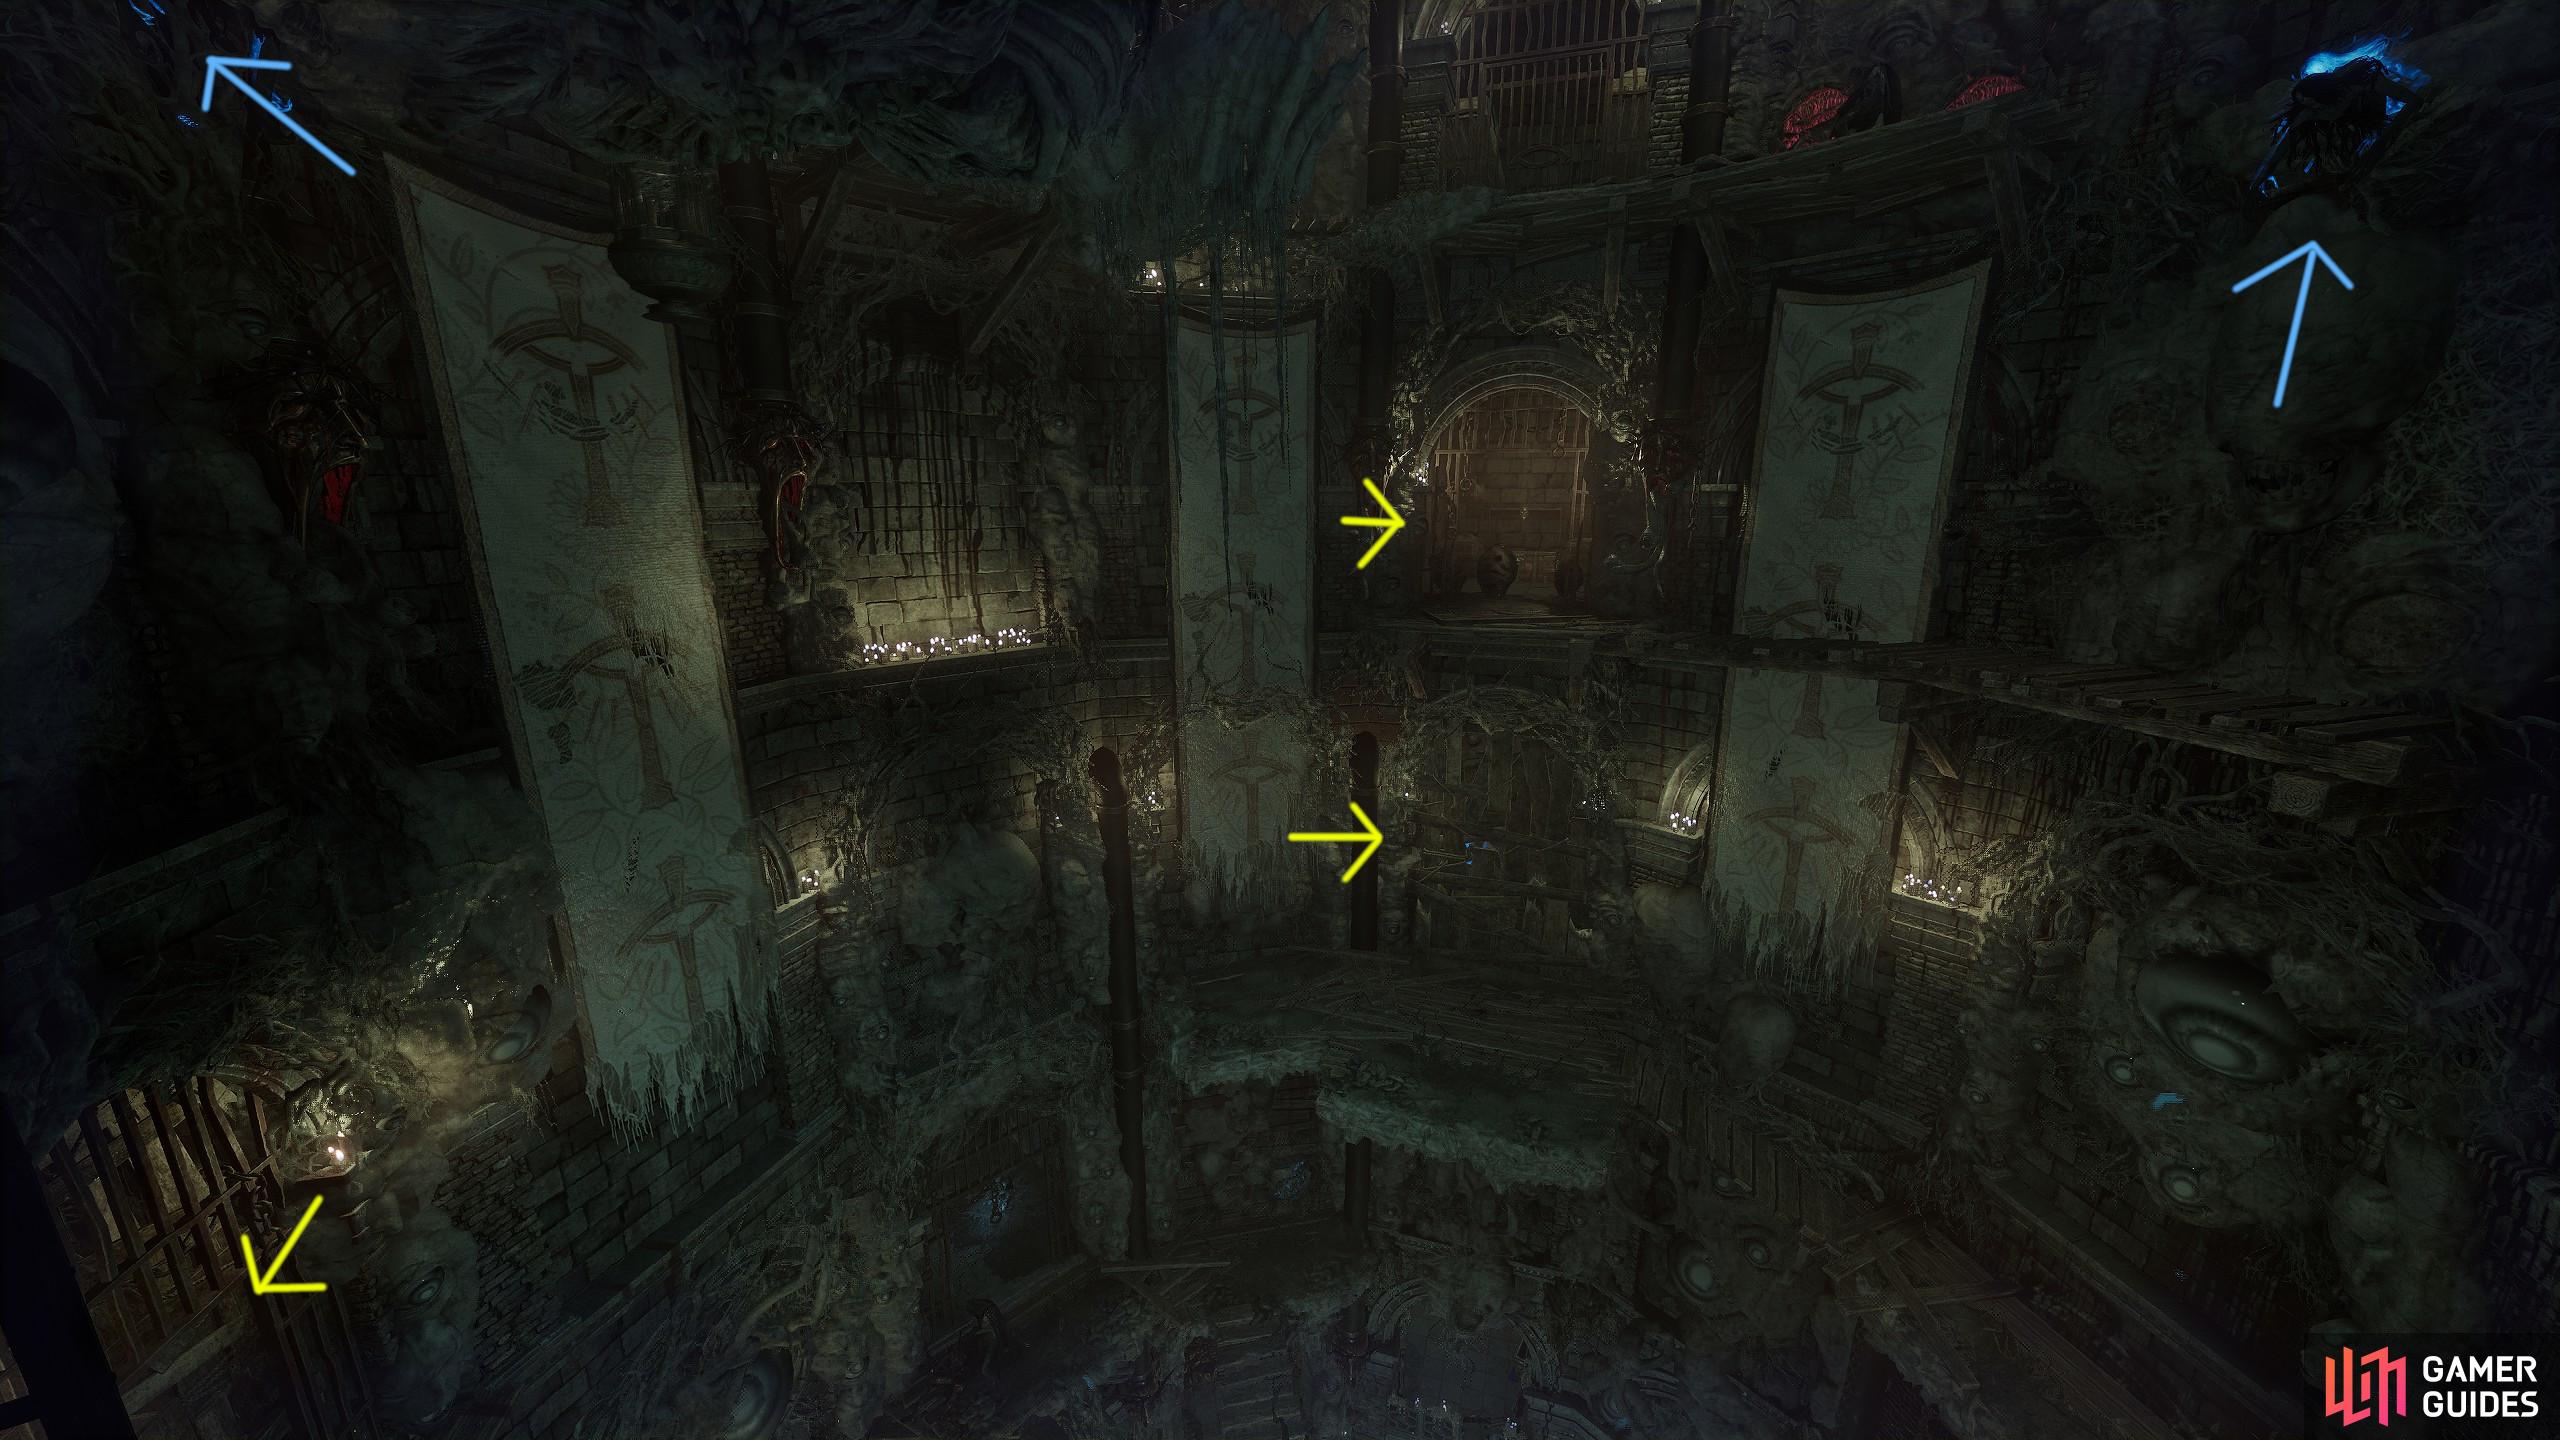 Blue arrows indicate the Soul Flay area that creates optional pathways to loot, and main progress pathways. The Yellow arrows mean multiple rooms requiring multiple journeys to get the loot inside.